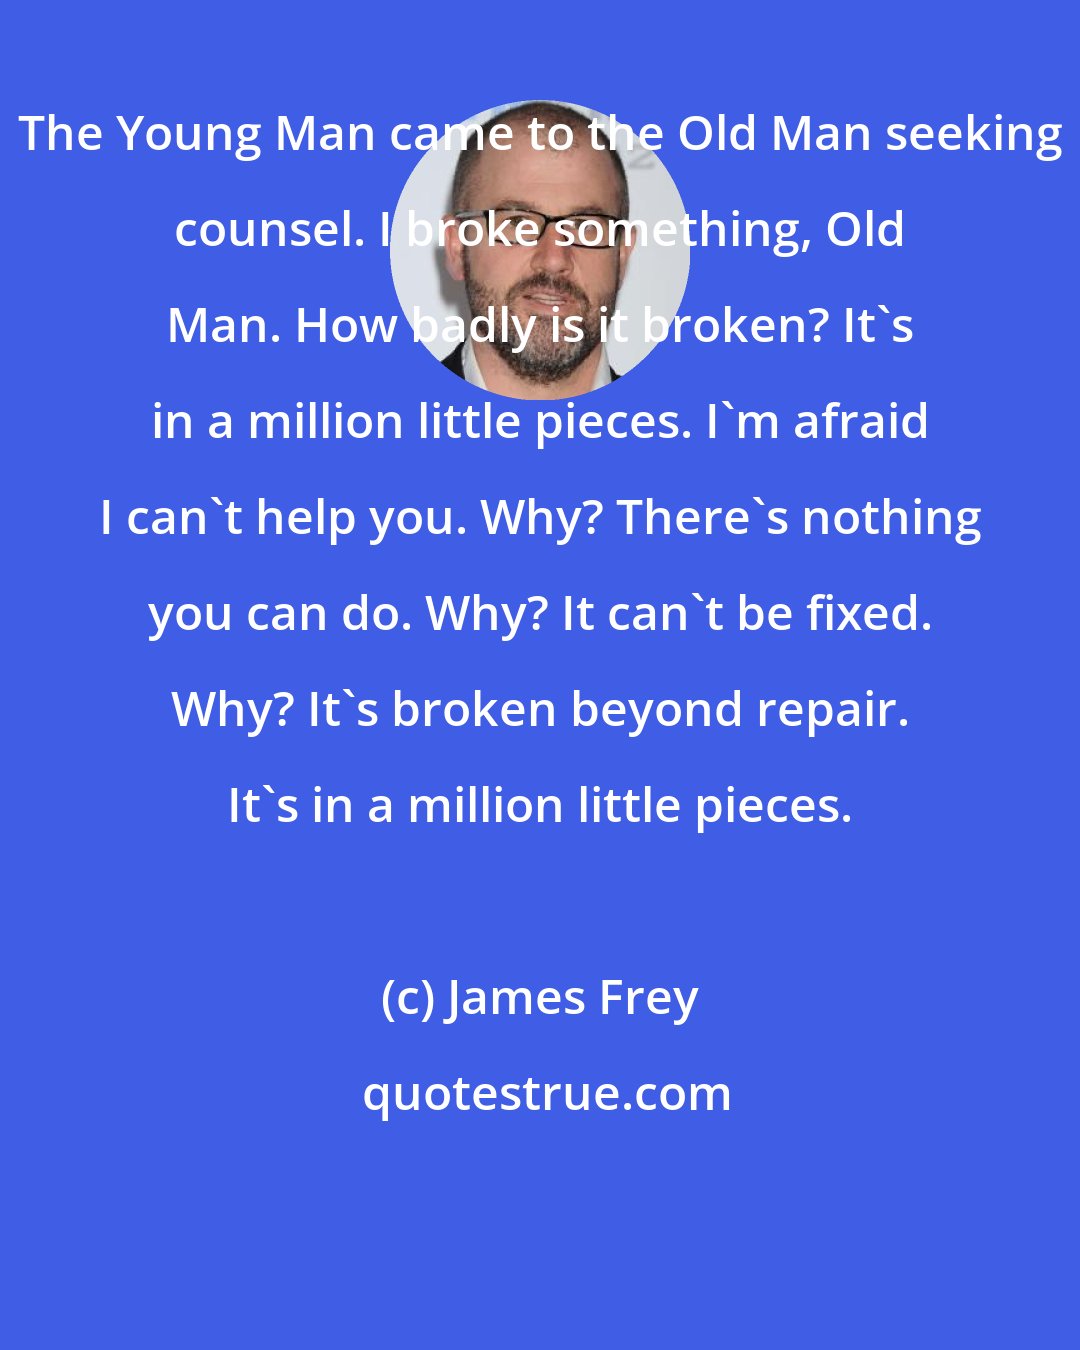 James Frey: The Young Man came to the Old Man seeking counsel. I broke something, Old Man. How badly is it broken? It's in a million little pieces. I'm afraid I can't help you. Why? There's nothing you can do. Why? It can't be fixed. Why? It's broken beyond repair. It's in a million little pieces.